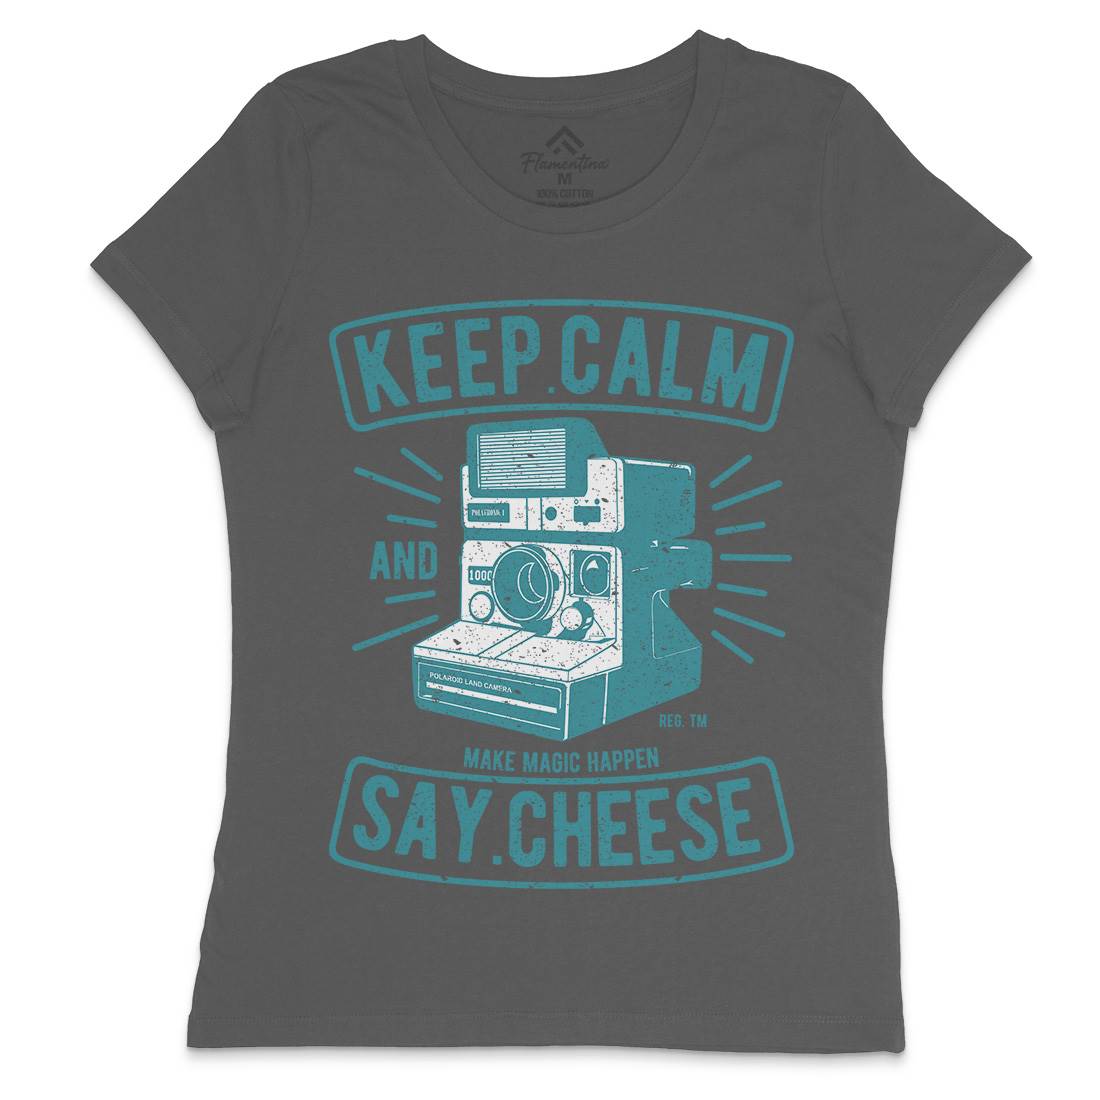 Keep Calm And Say Cheese Womens Crew Neck T-Shirt Media A699